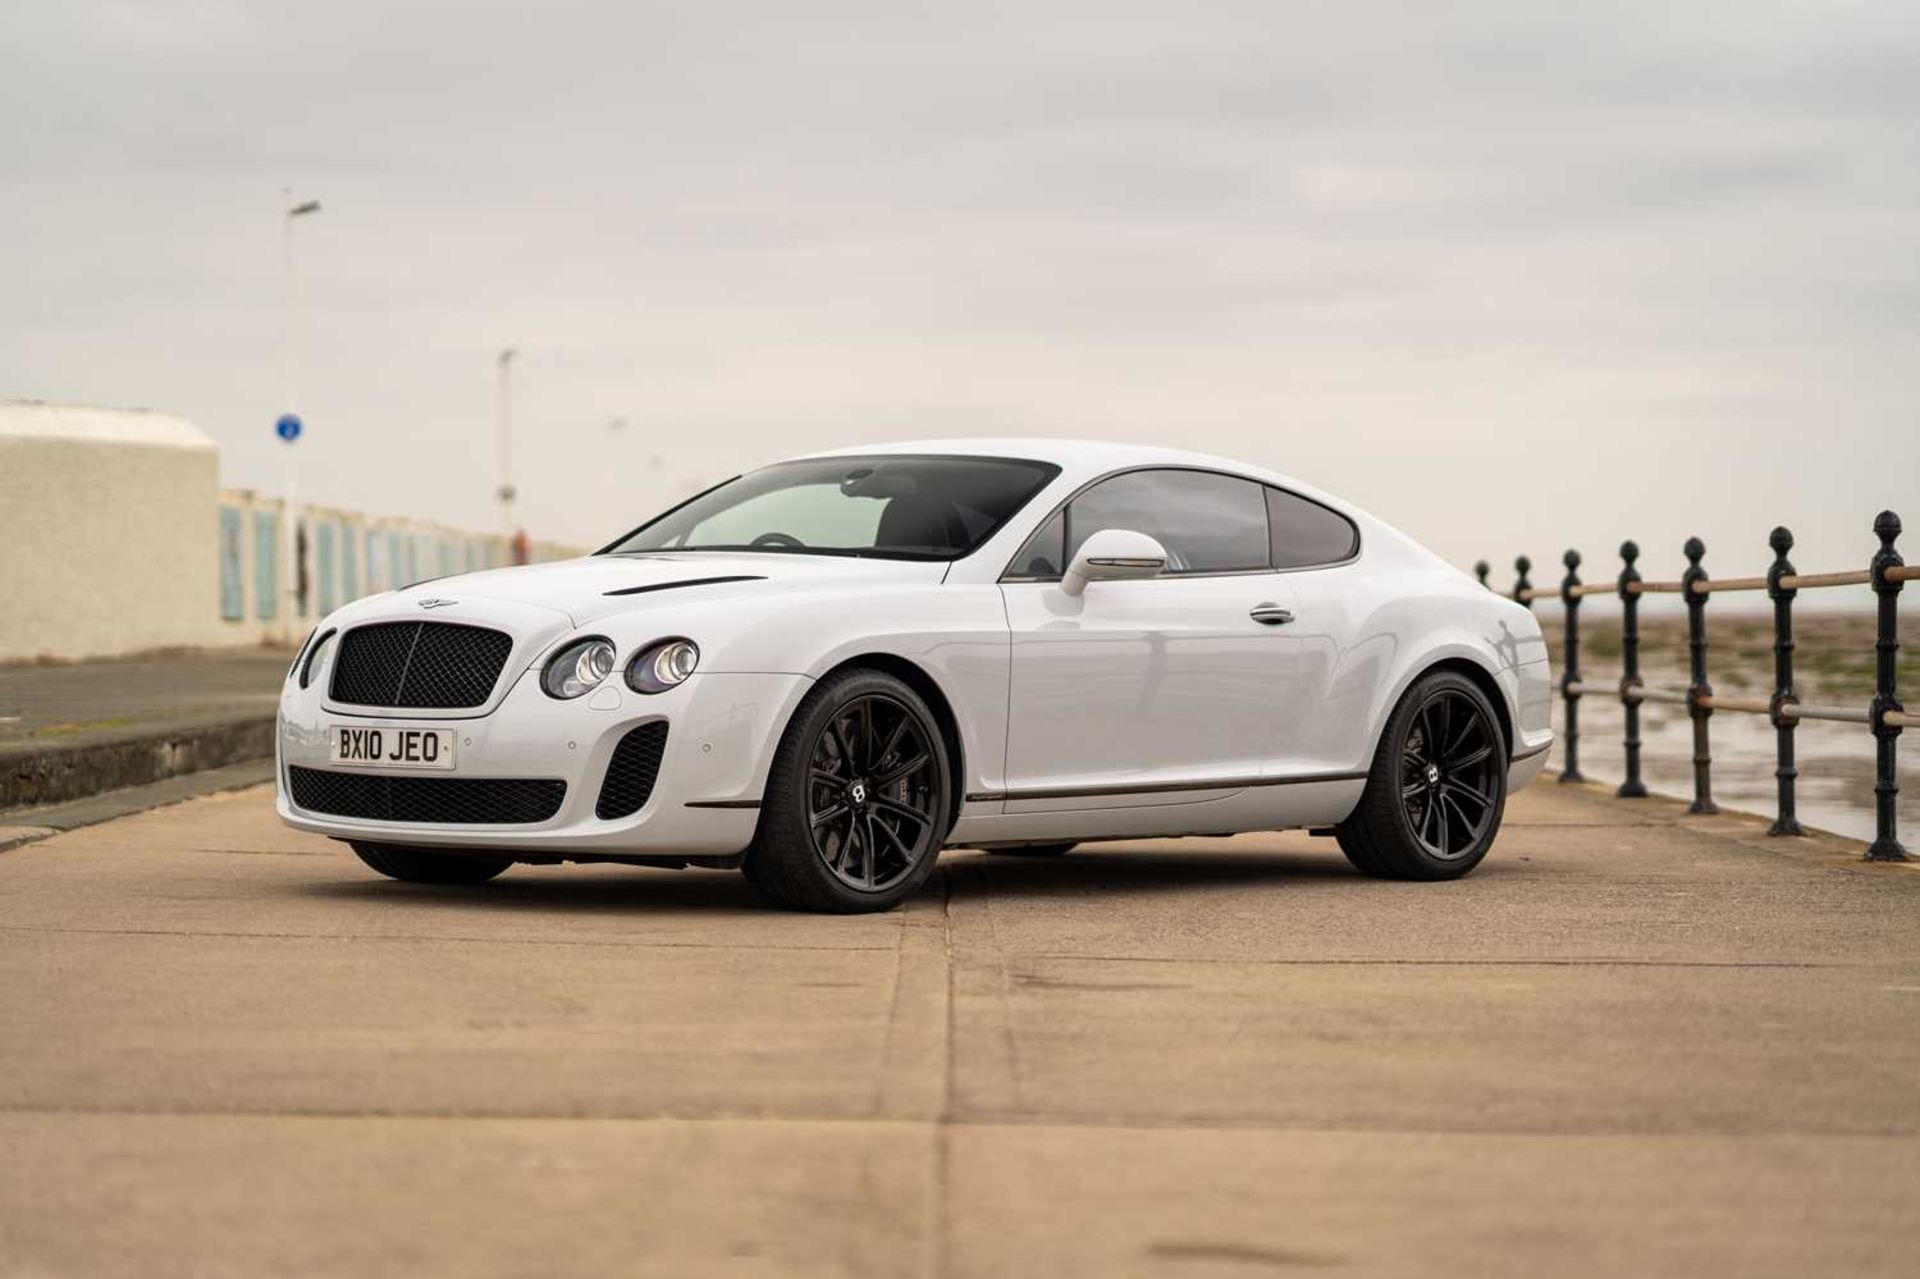 2010 Bentley Continental Supersports Only 33,000 miles with full Bentley service history - Image 4 of 52